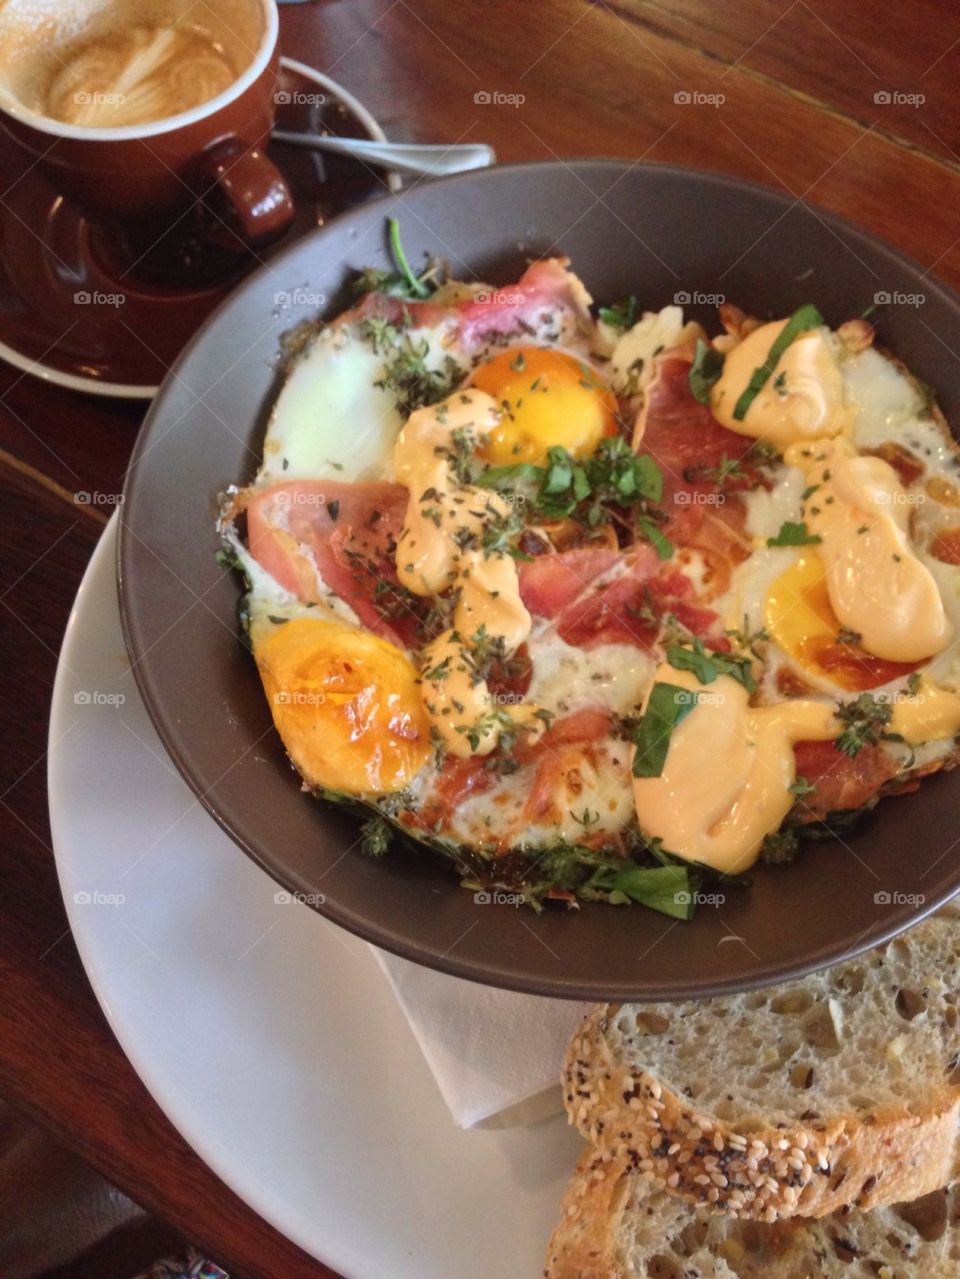 Baked eggs and prosciutto